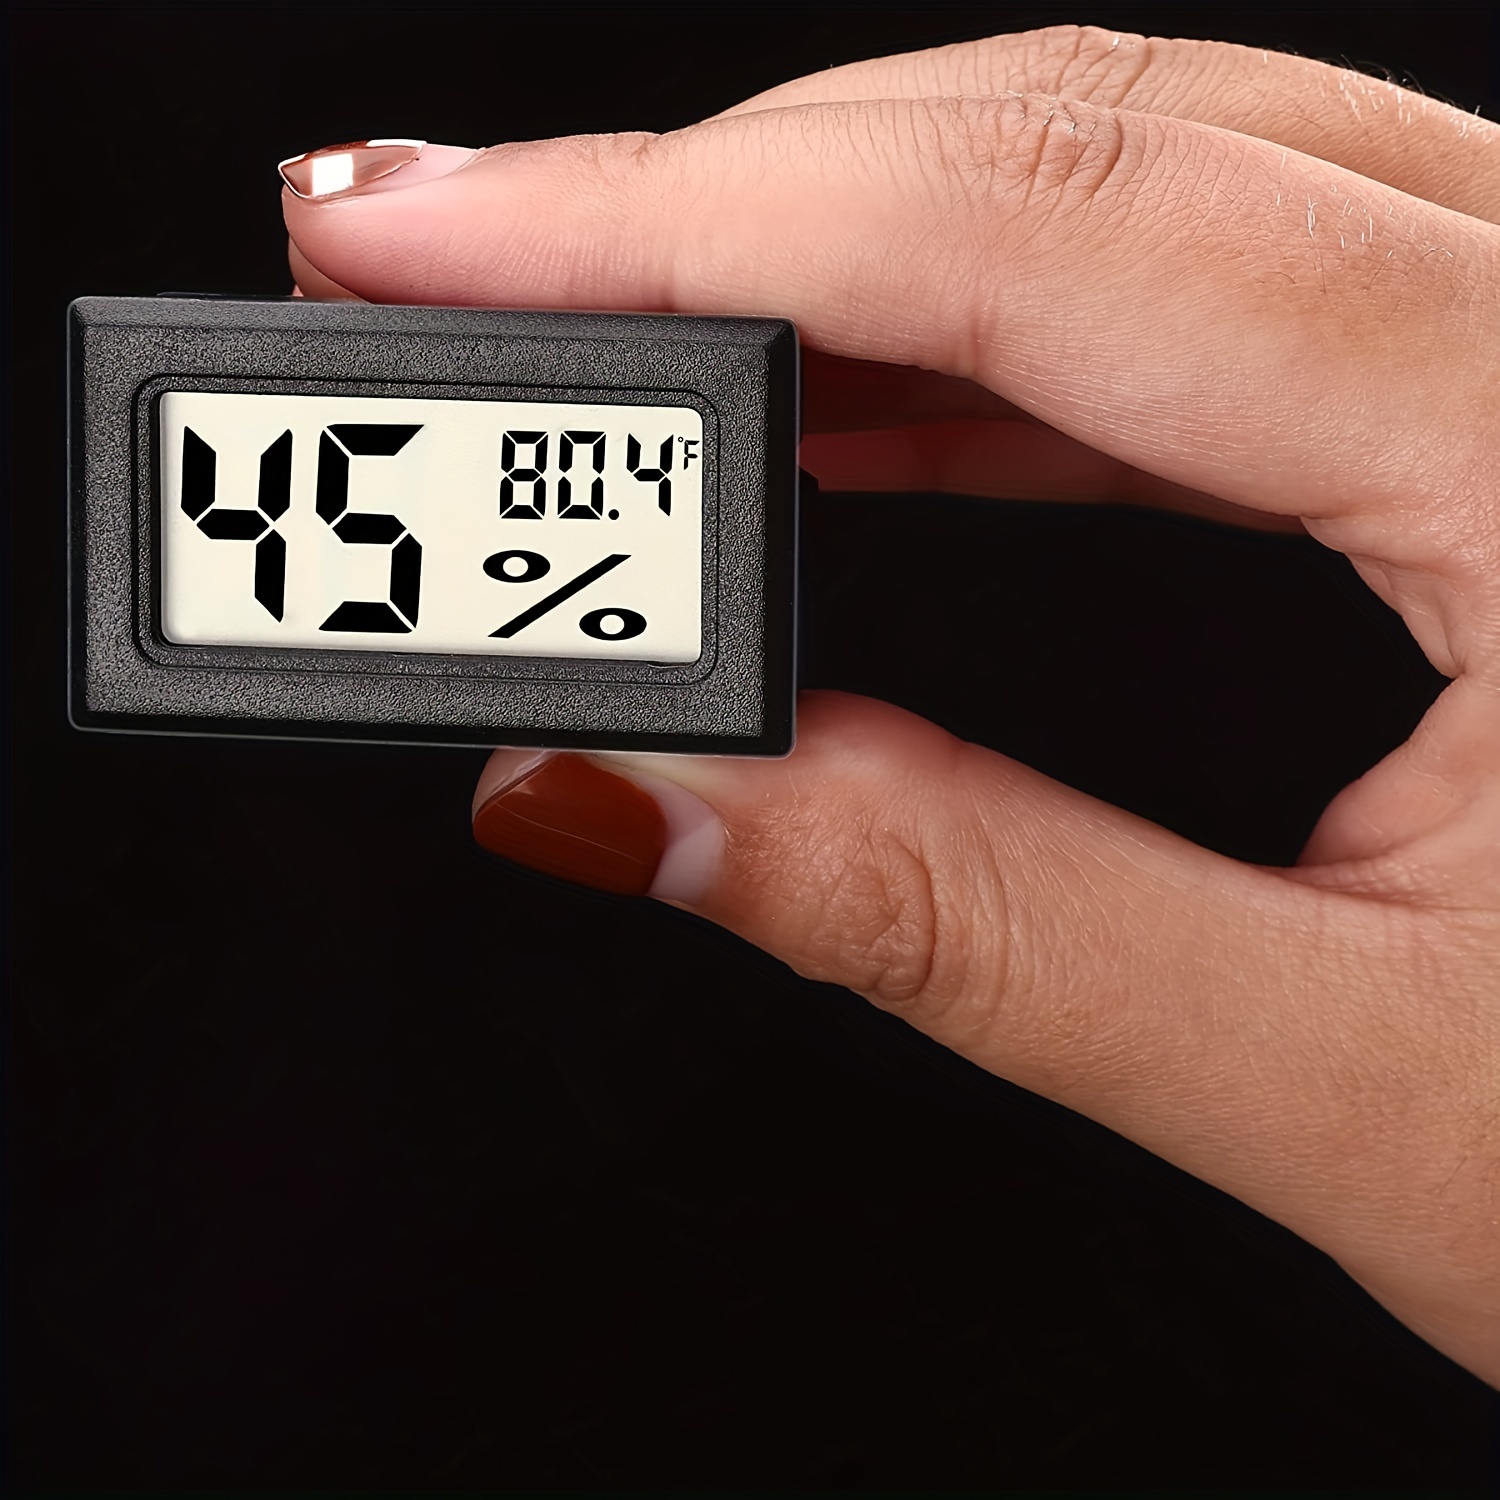 Indoor Thermo-hygrometer, Electronic Hygrograph Lndoor And Outdoor